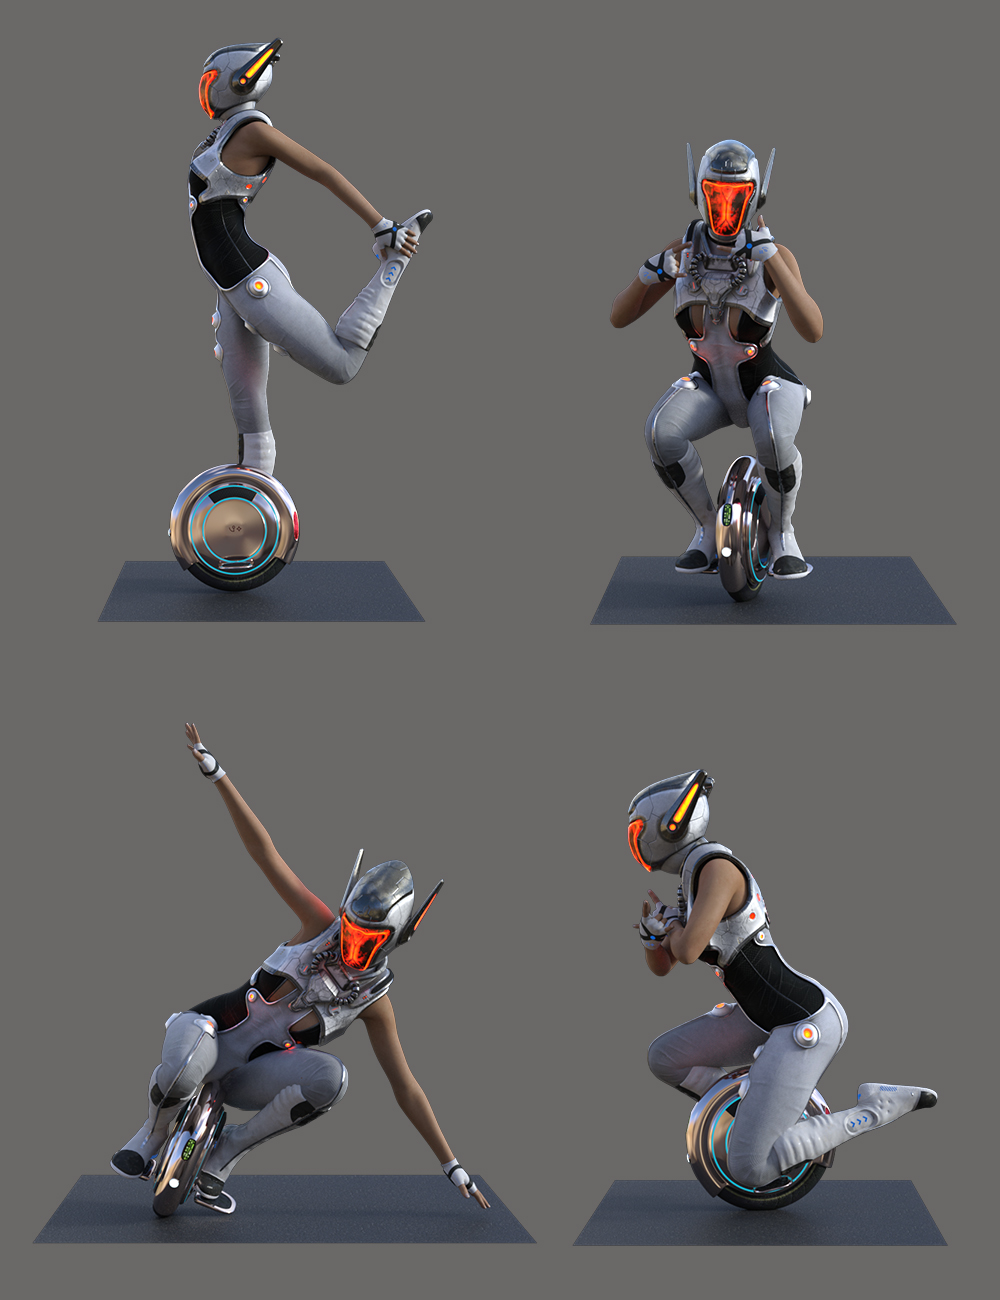 Hierarchical Poses for Gyrowheel by: Ensary, 3D Models by Daz 3D